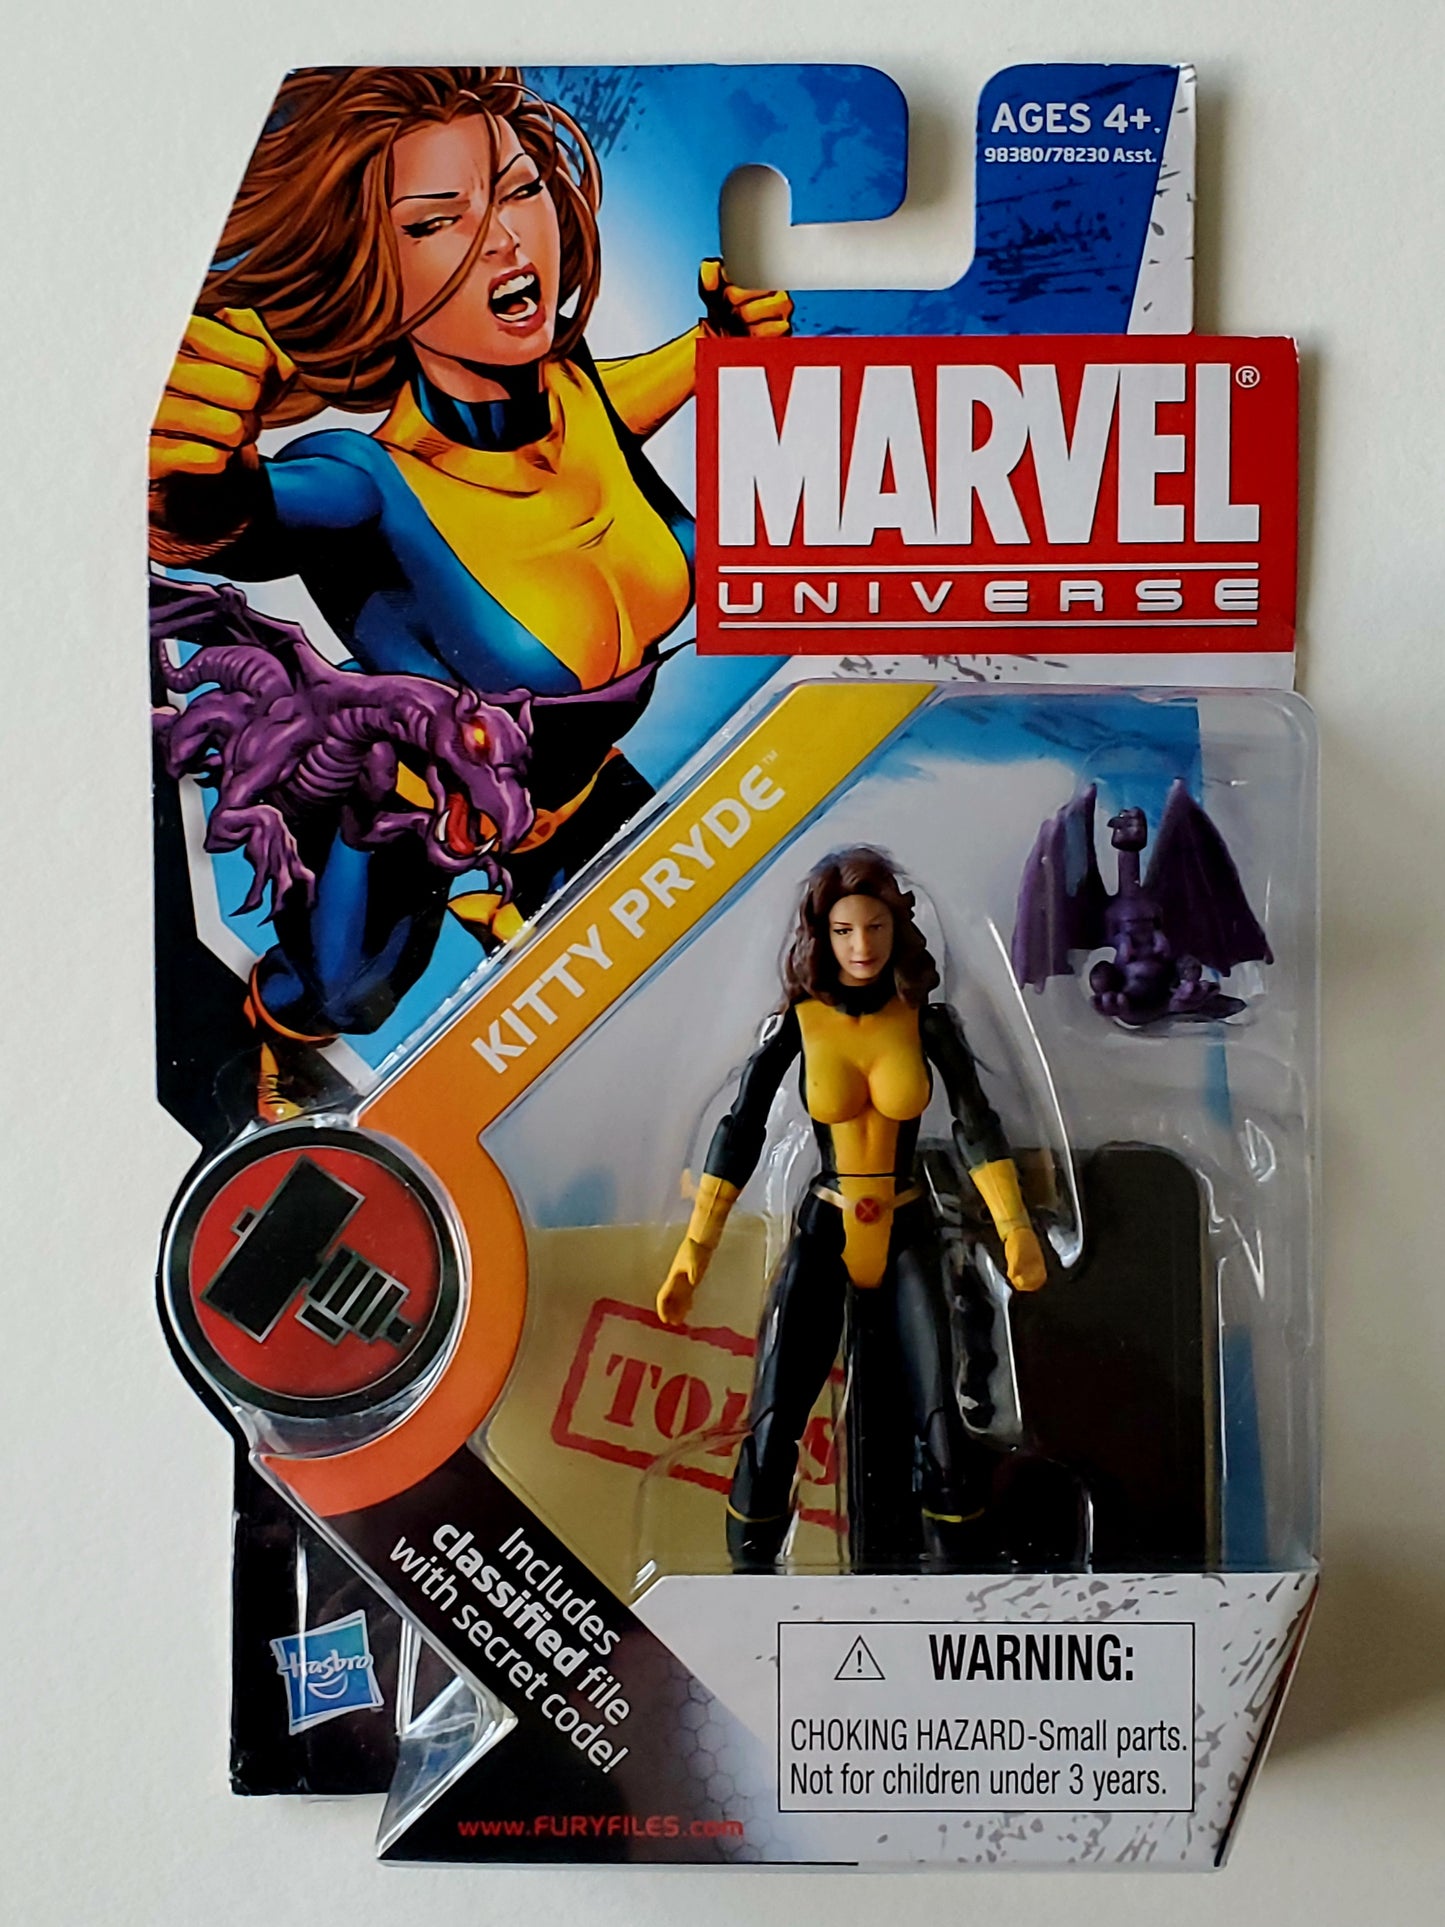 Marvel Universe Series 2 Figure 17 Kitty Pryde 3.75-Inch Action Figure